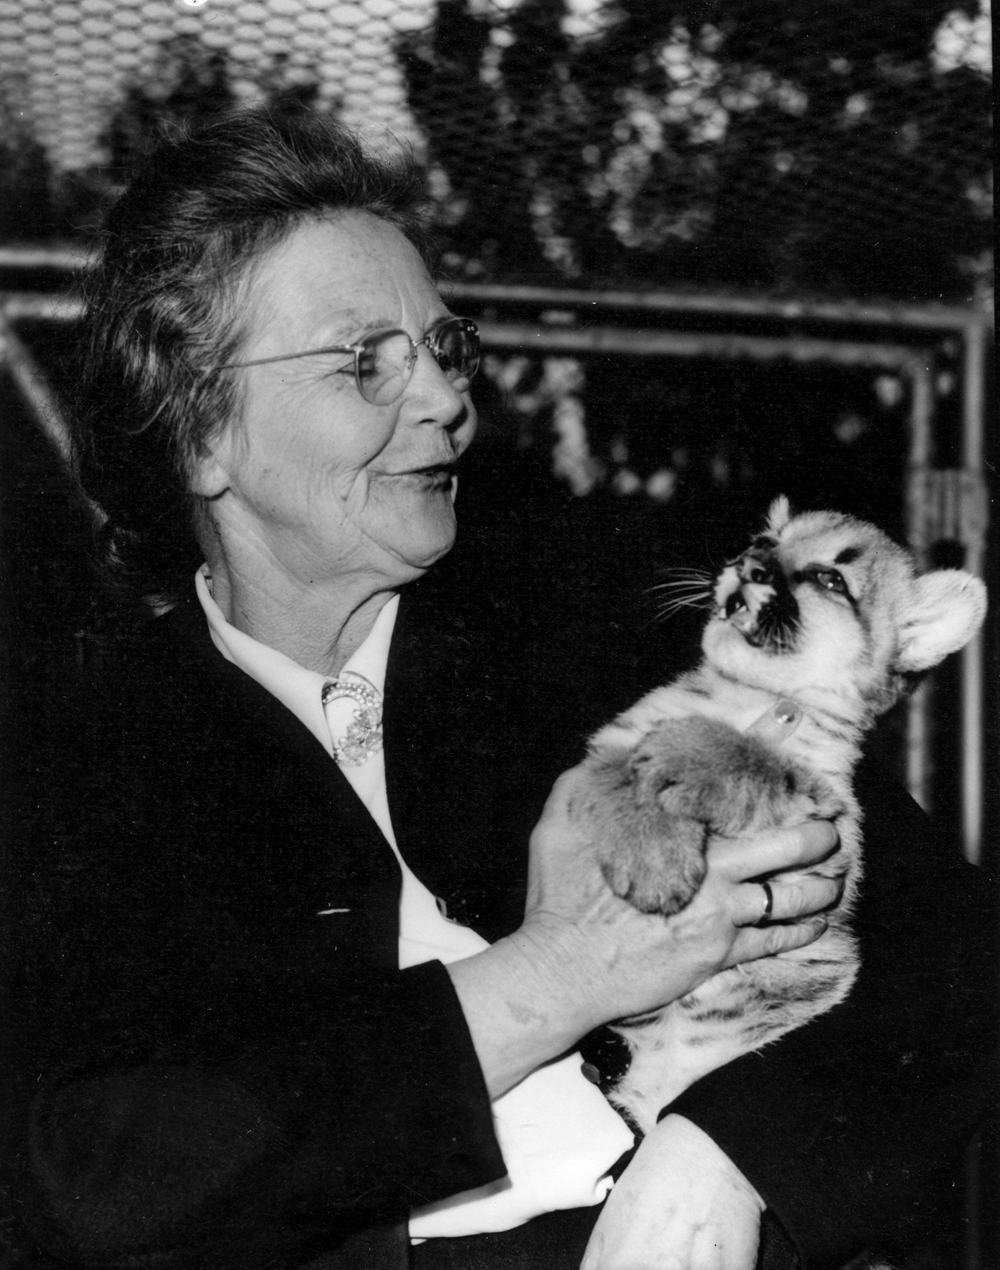 Belle Benchley with a mountain lion cub